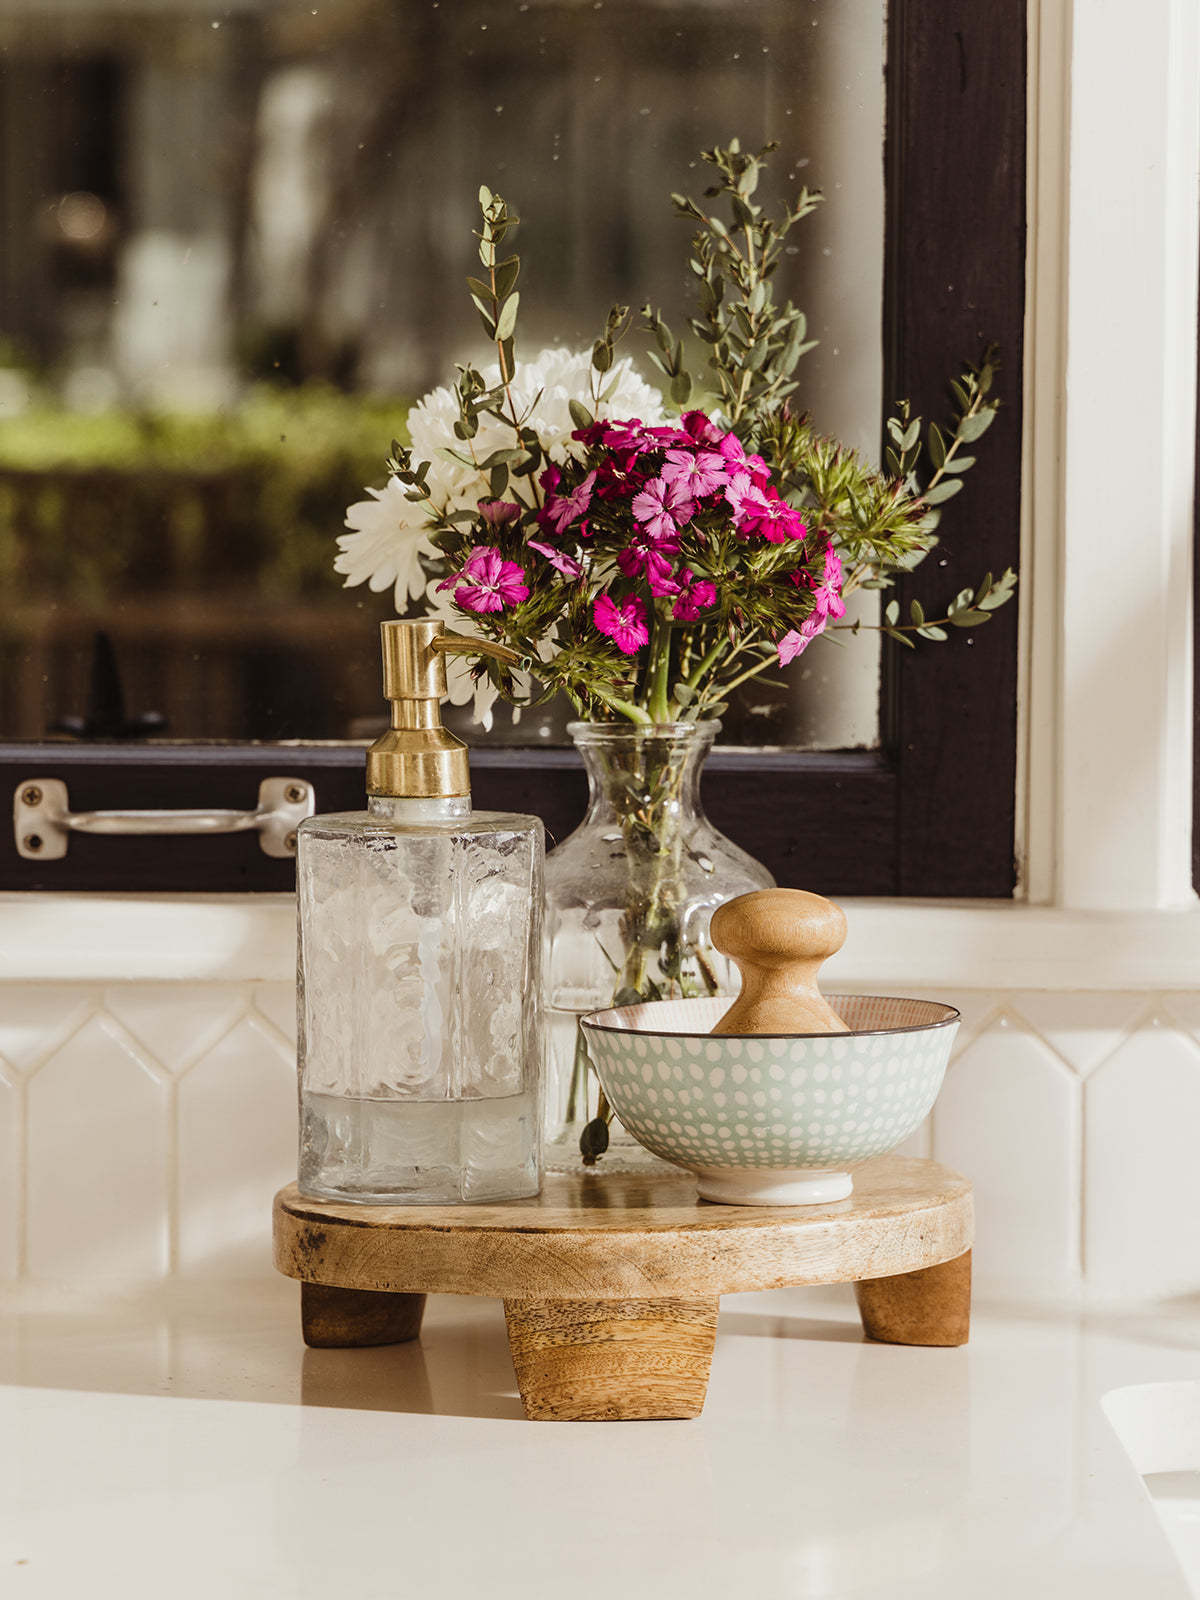 Small mango wood tray holding soap dispenser and flower vase atop. Placed on a white counter in front of a window. 